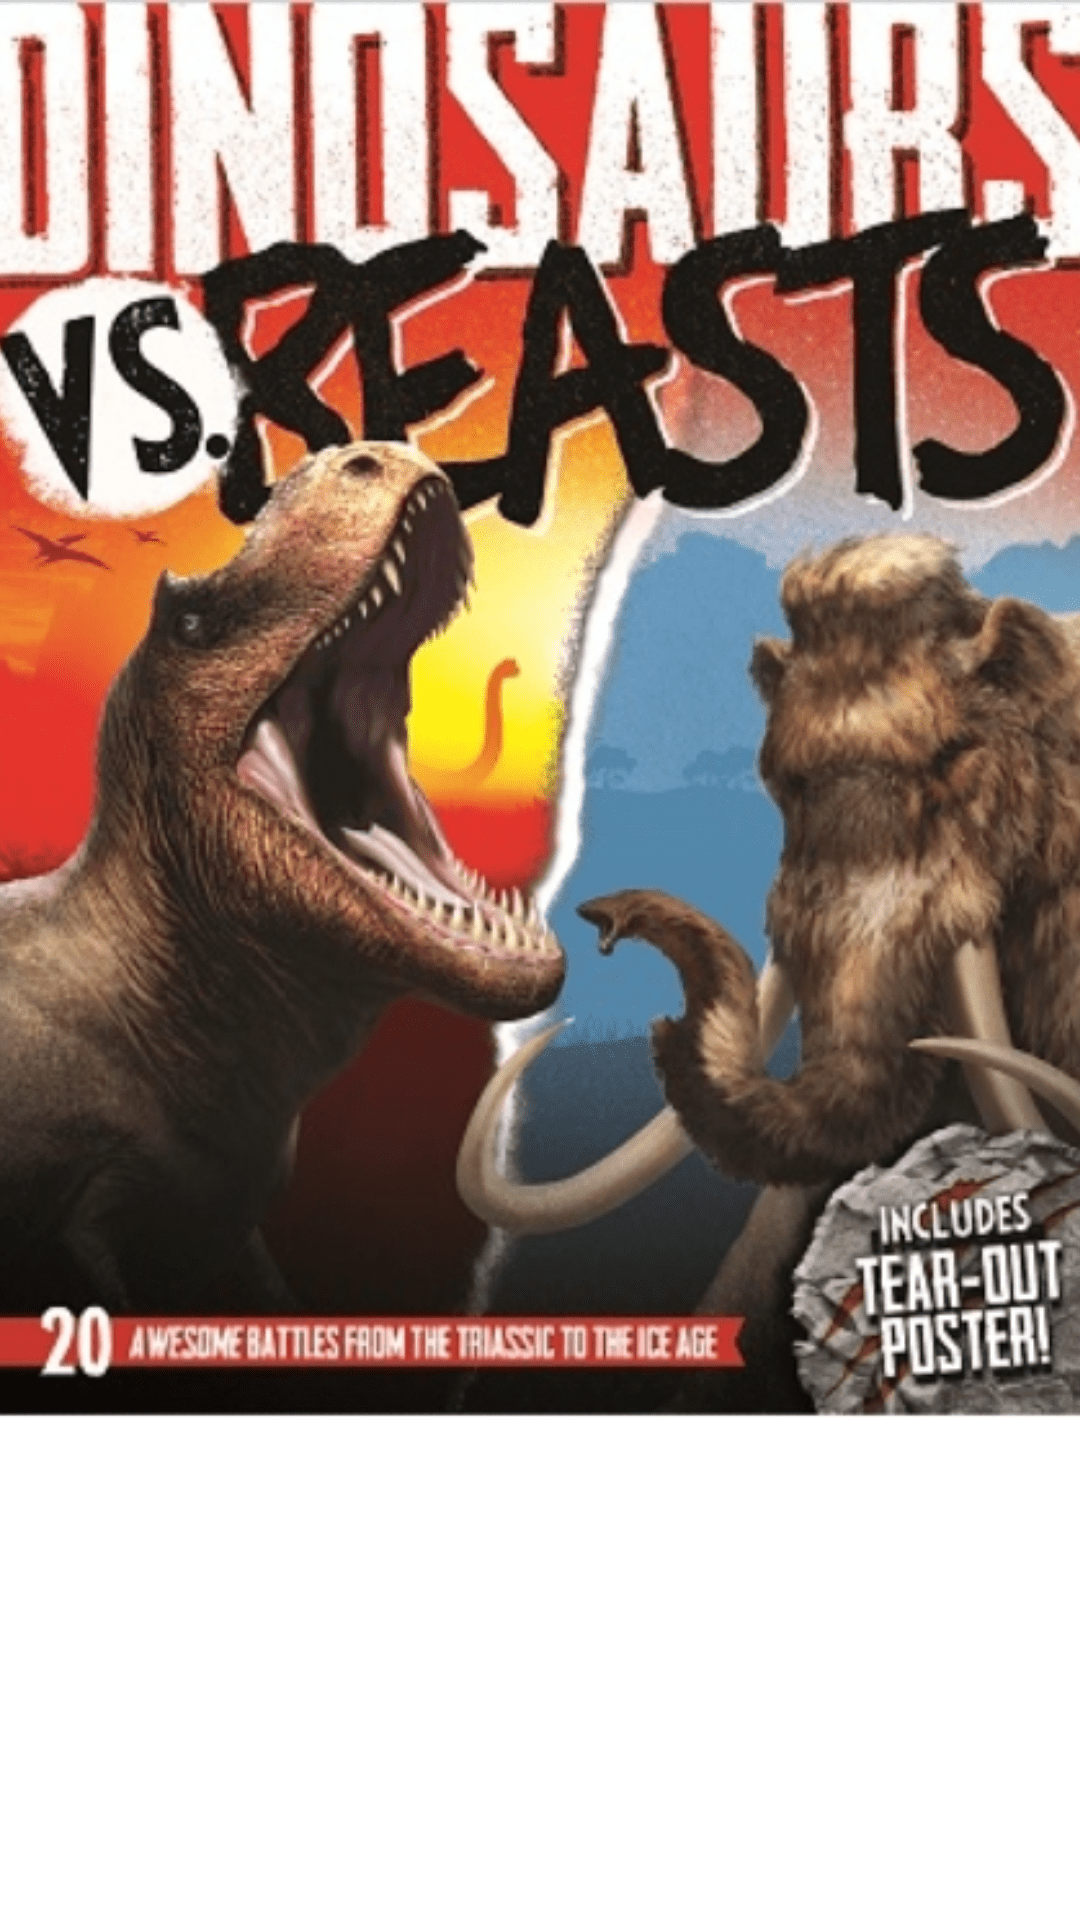 Dinosaurs VS. Beasts: 20 Awesome Battles From The Triassic To The Ice Age